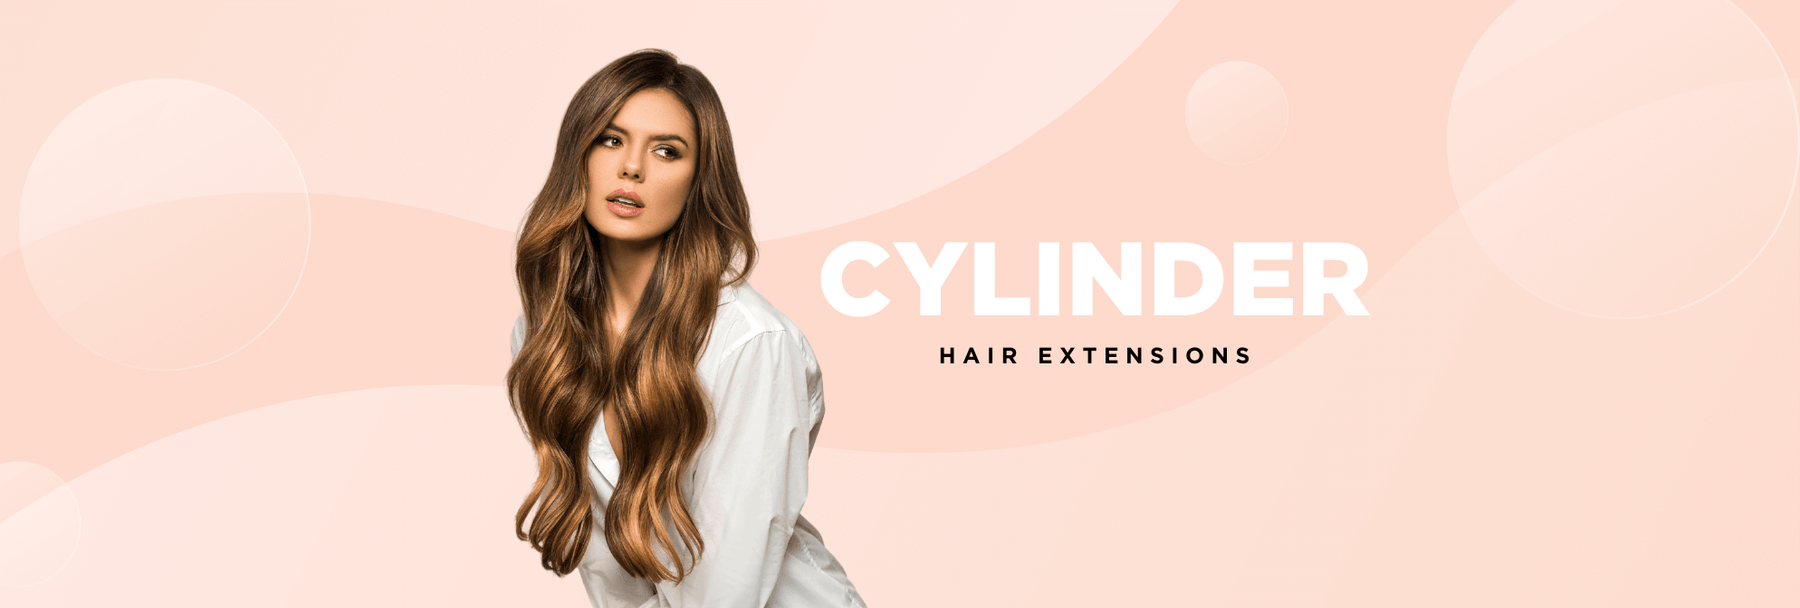 Aqua Cylinder Hair Extensions - The choice of professionals